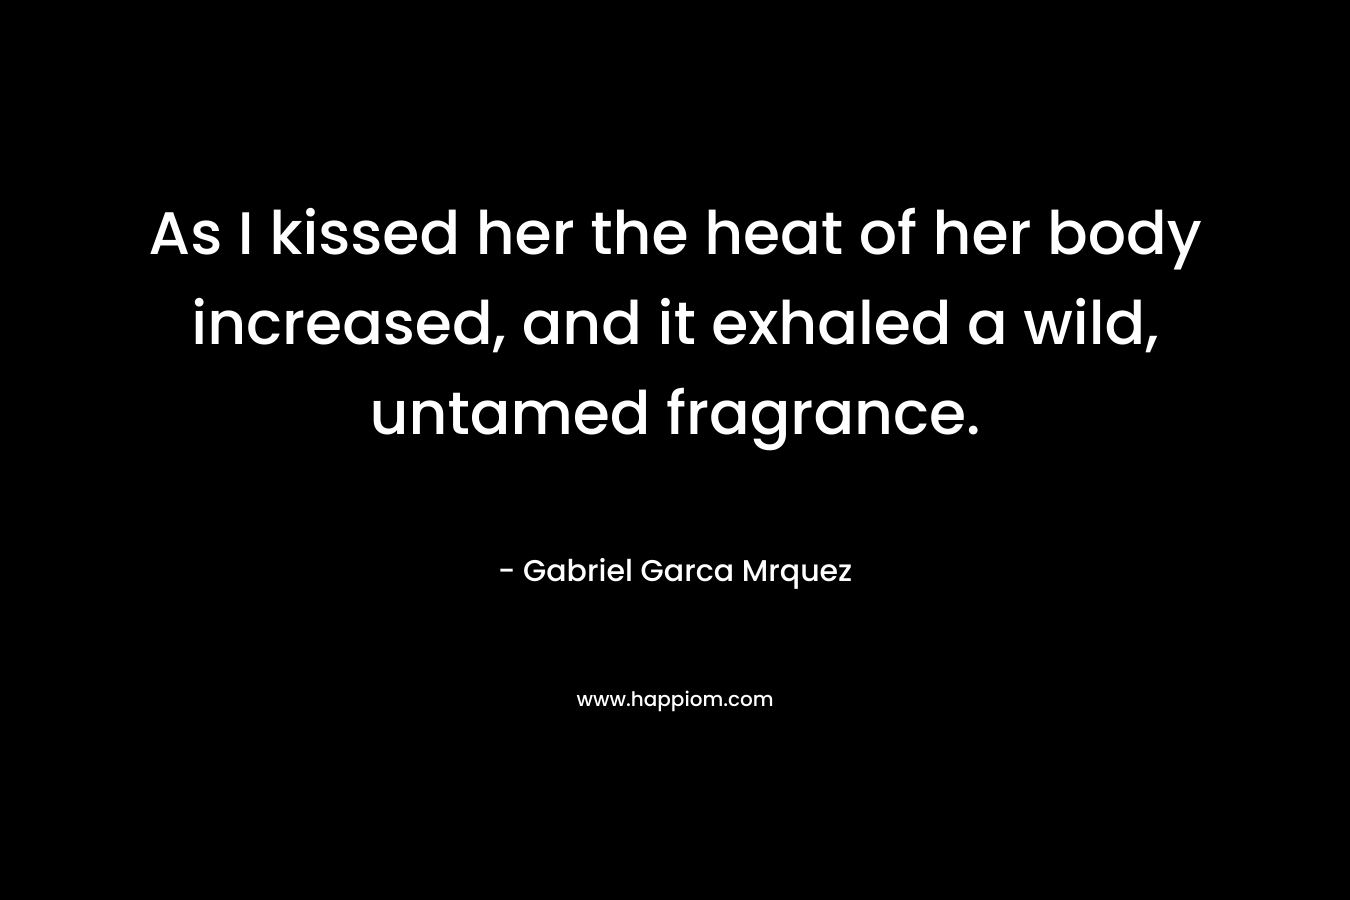 As I kissed her the heat of her body increased, and it exhaled a wild, untamed fragrance. – Gabriel Garca Mrquez